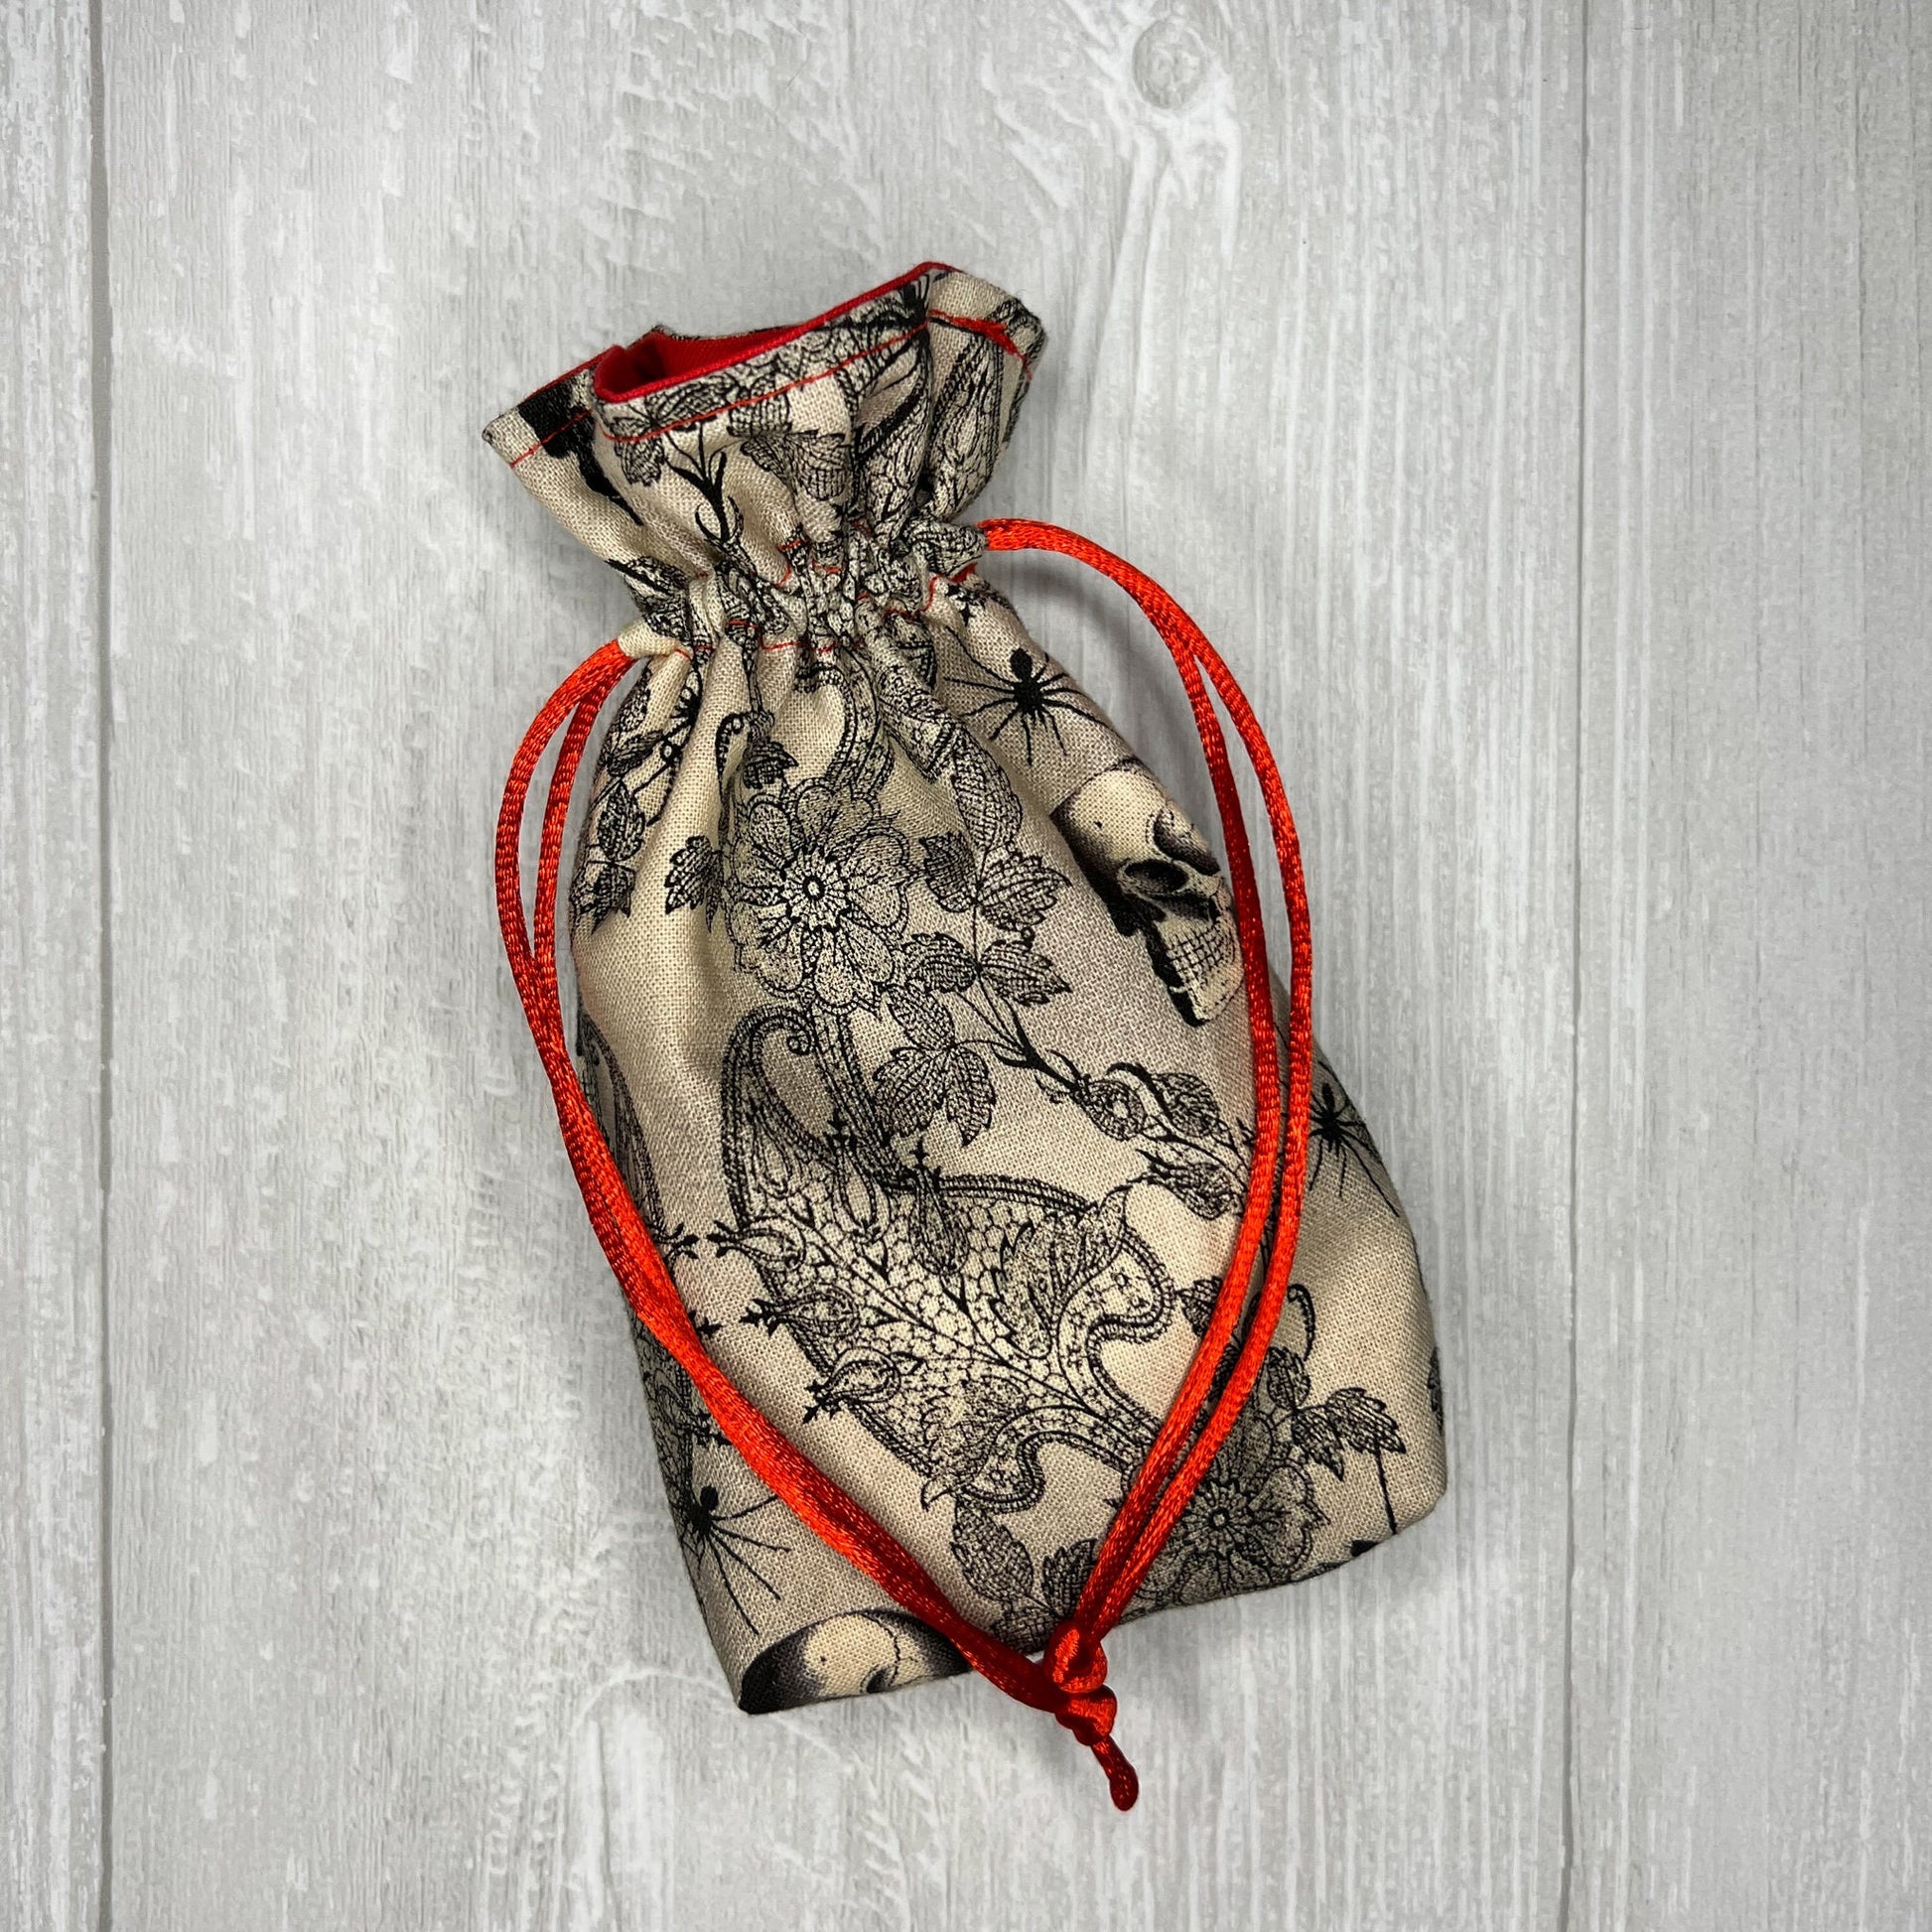 Red Mini Tarot Deck Bag, Drawstring Pouch, Pocket Tarot, Dice Rune Crystal Bag, Witchcraft Wiccan & Pagan Supplies Gifts, Divination Tools